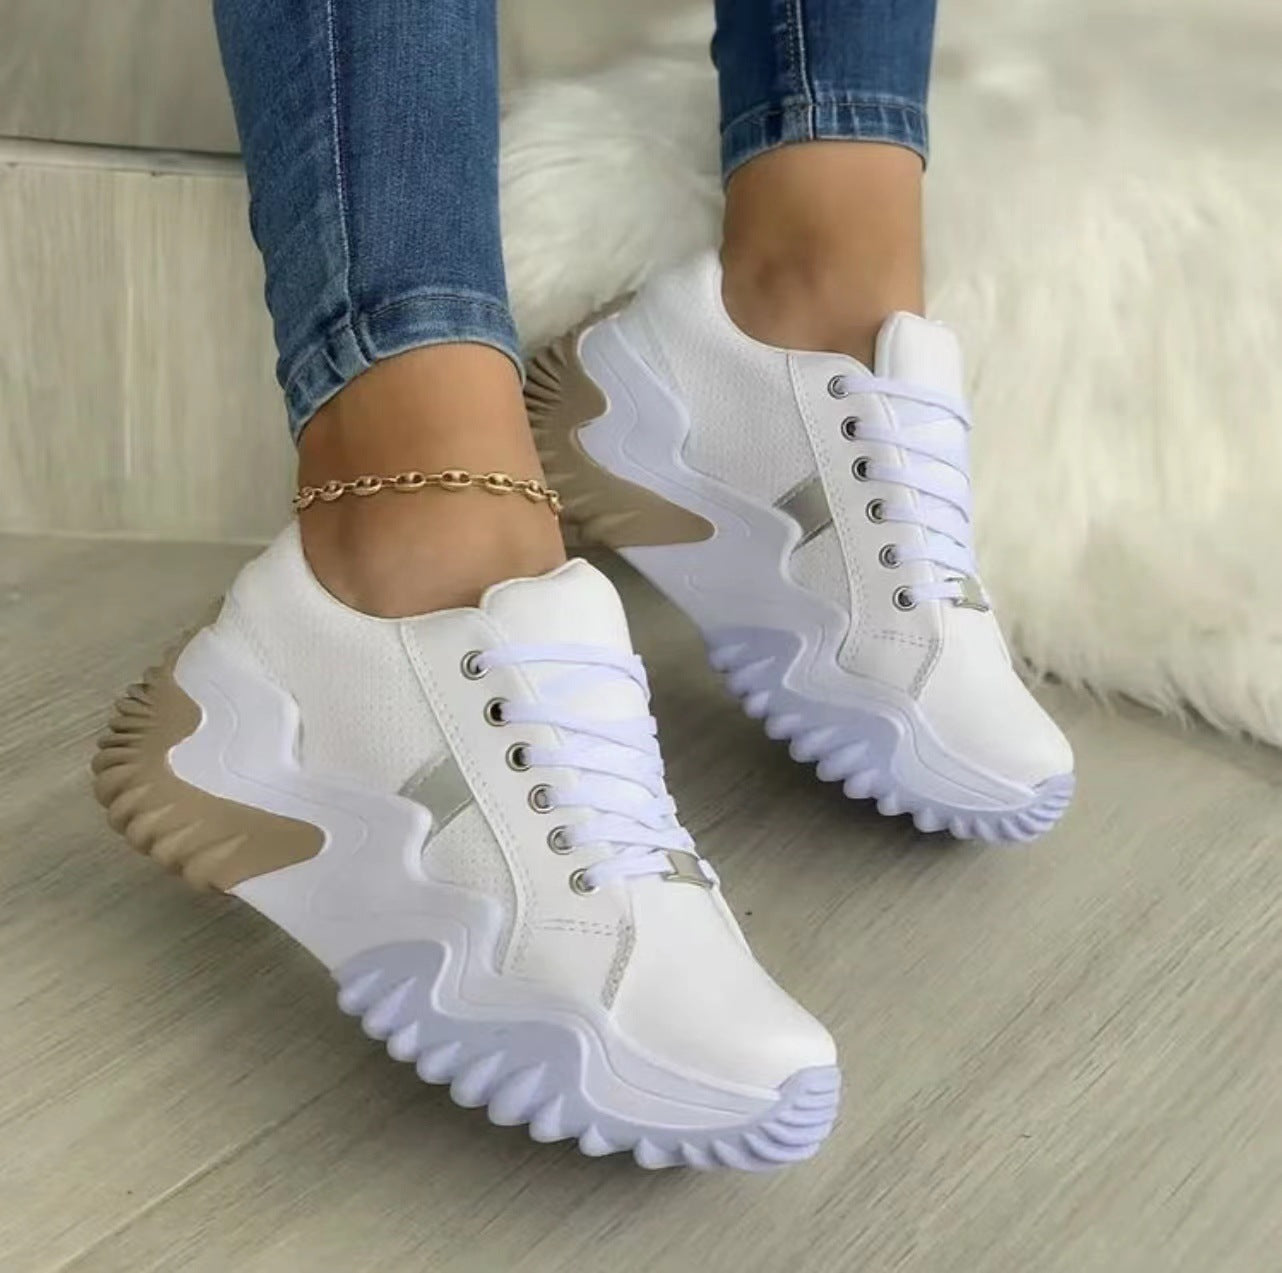 Women Shoes Lace-up Sports Sneakers